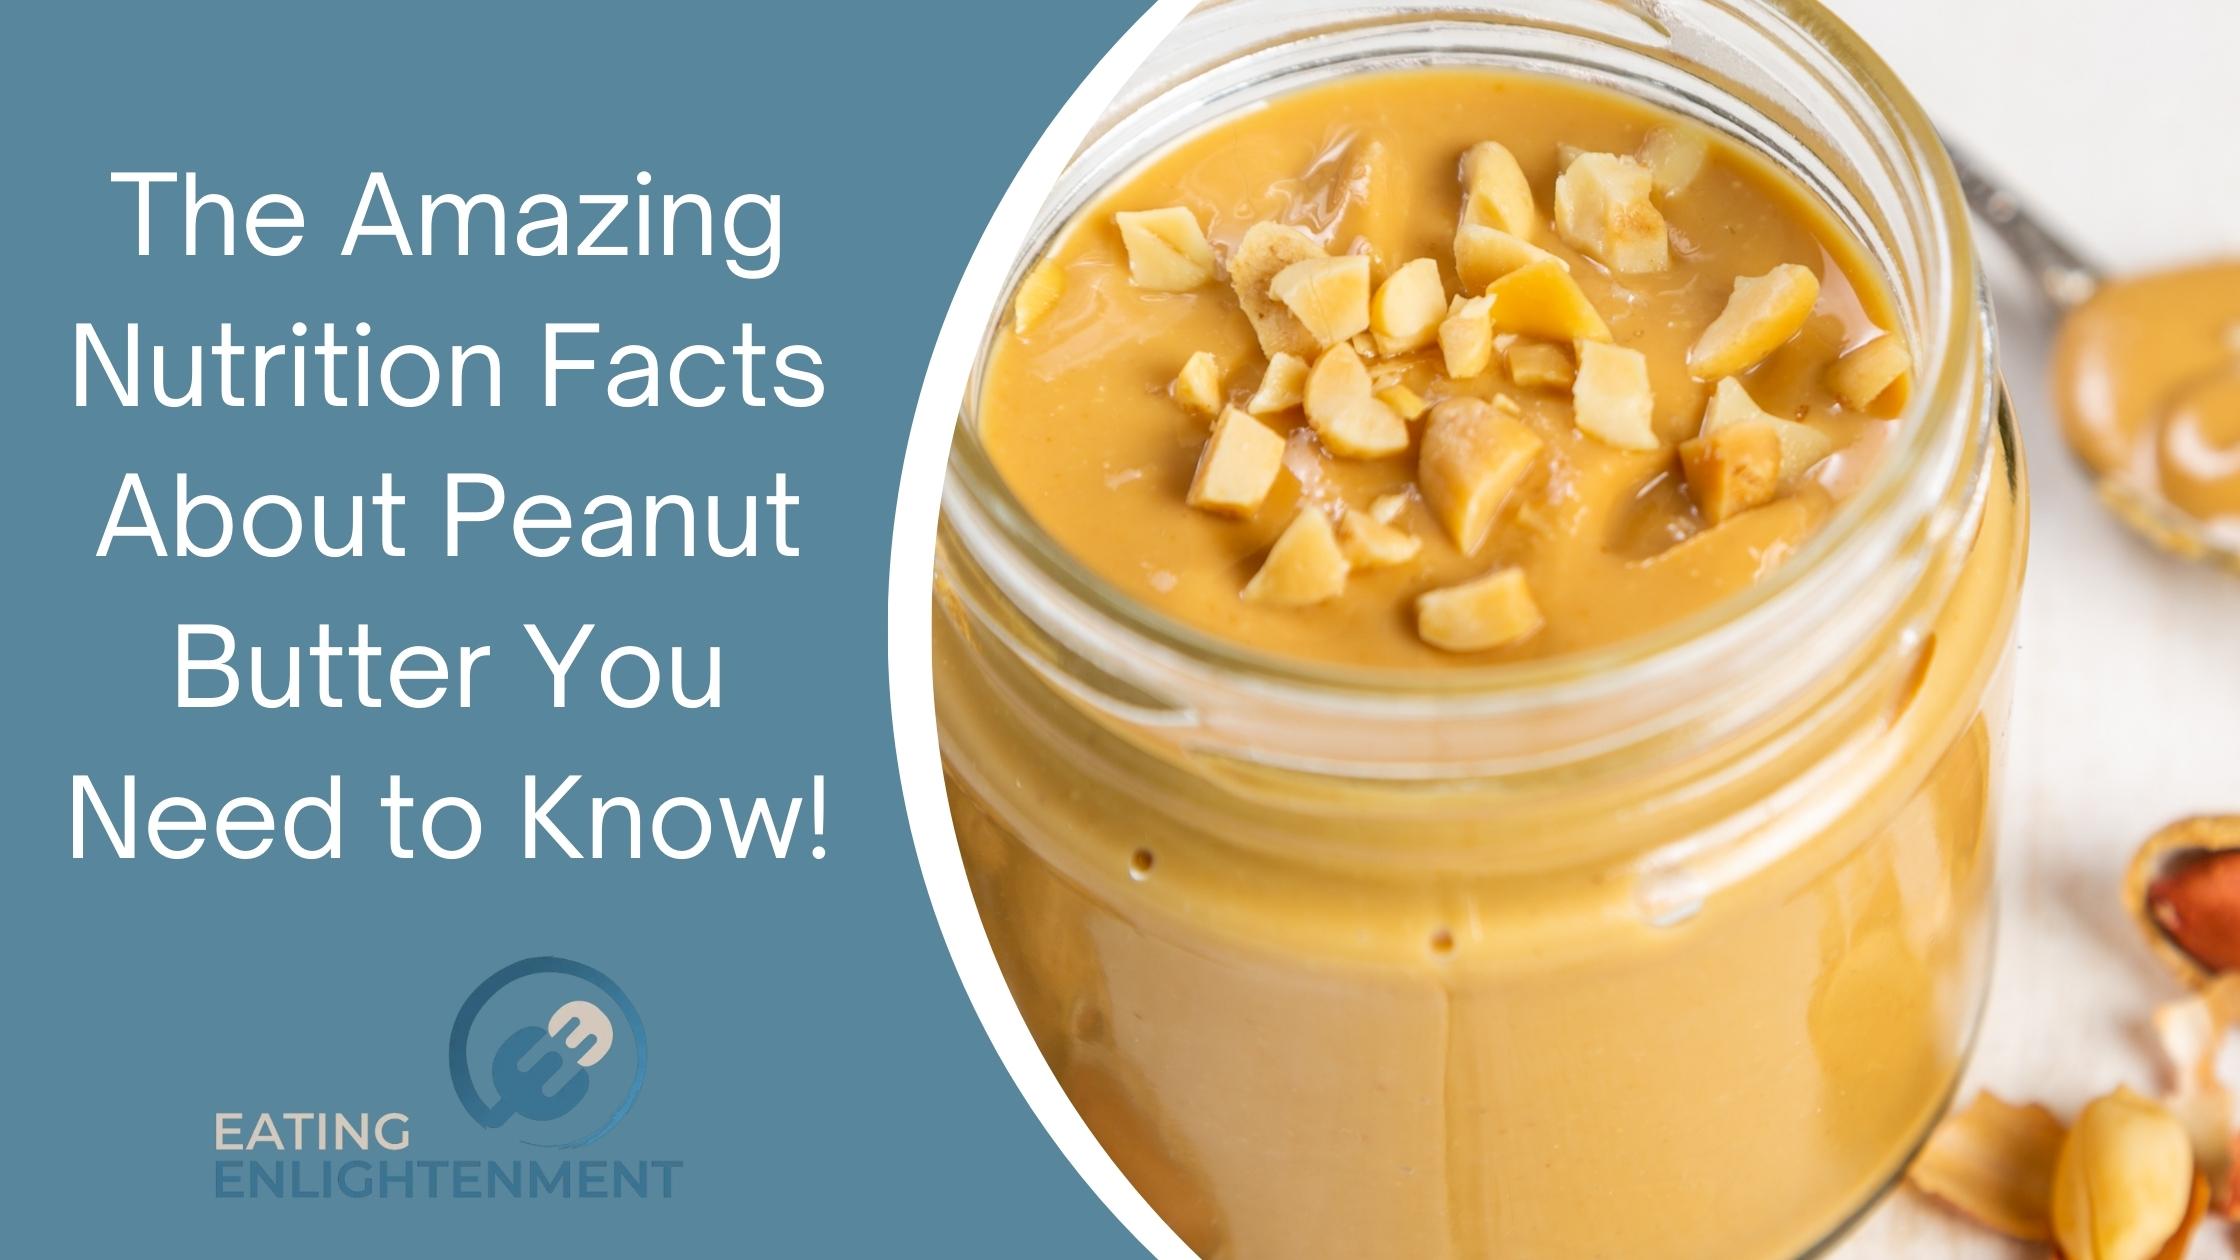 The Amazing Nutrition Facts About Peanut Butter You Need to Know!